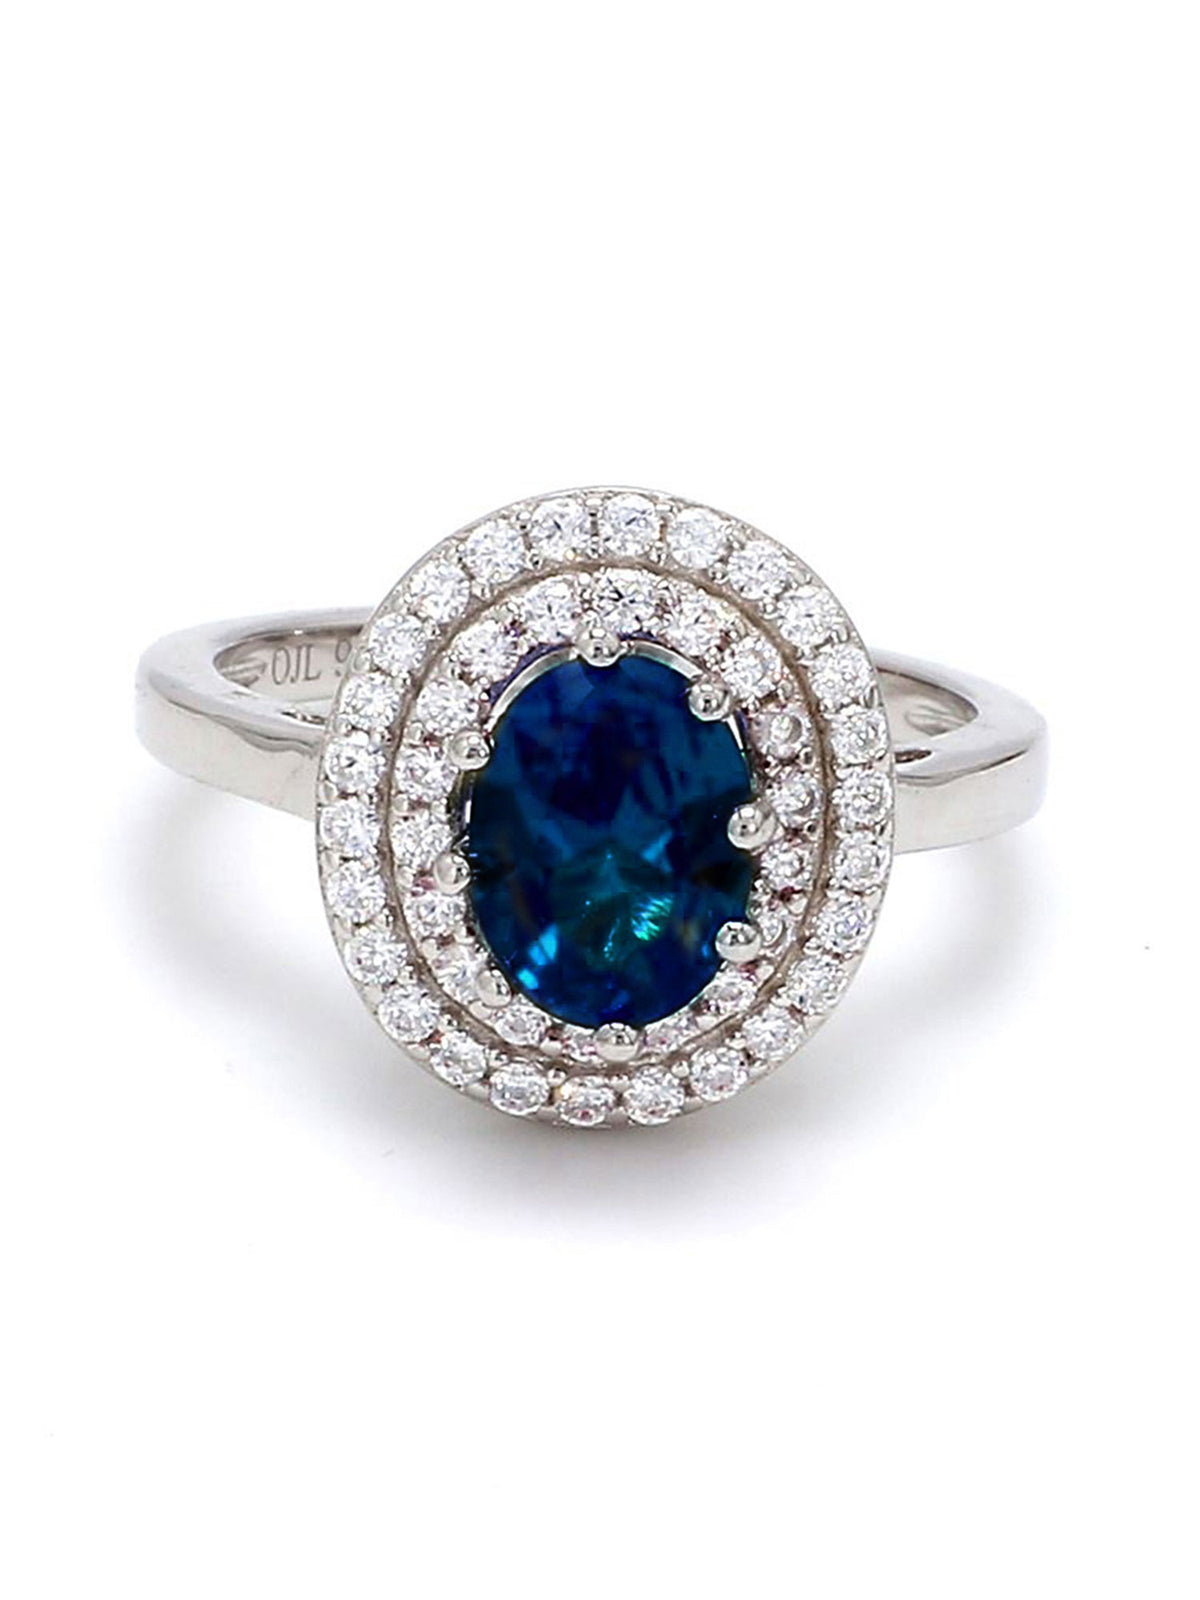 ORNATE JEWELS BLUE SAPPHIRE SOLITAIRE HALO RING-1